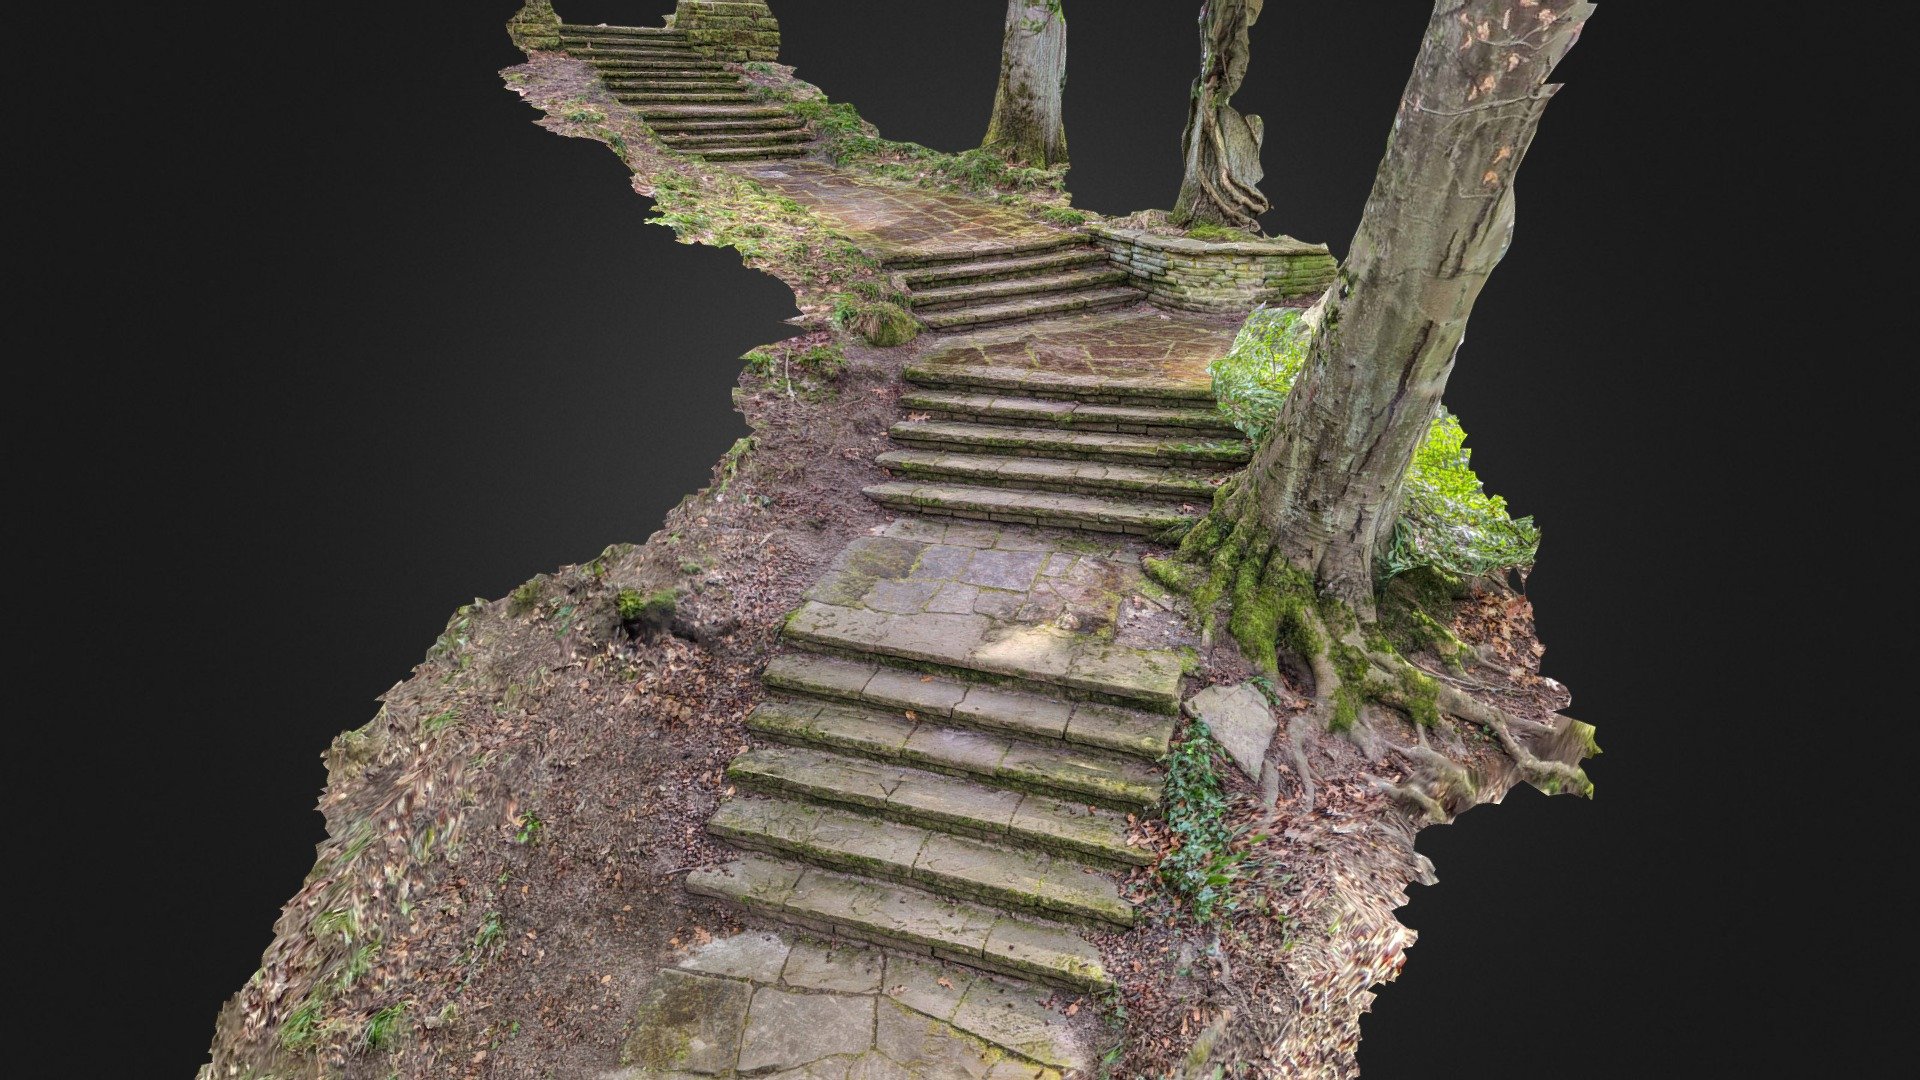 Some stairs I found in the German-French Garden in Saarbrücken.

Did you know? Over 3 years ago, when I uploaded this decimated raw scan, Sketchfab did not have any restrictions for texture size (or at least none I can remember). Consequently, when the new 8k texture limit kicked in, my singular model was automatically split into 4 chunks (judging by the current number of UVs), to accomodate the lower resolutions. Therefore, the orginal texture must have been 16k (to be confirmed if the original project file is to be uncovered) 3d model